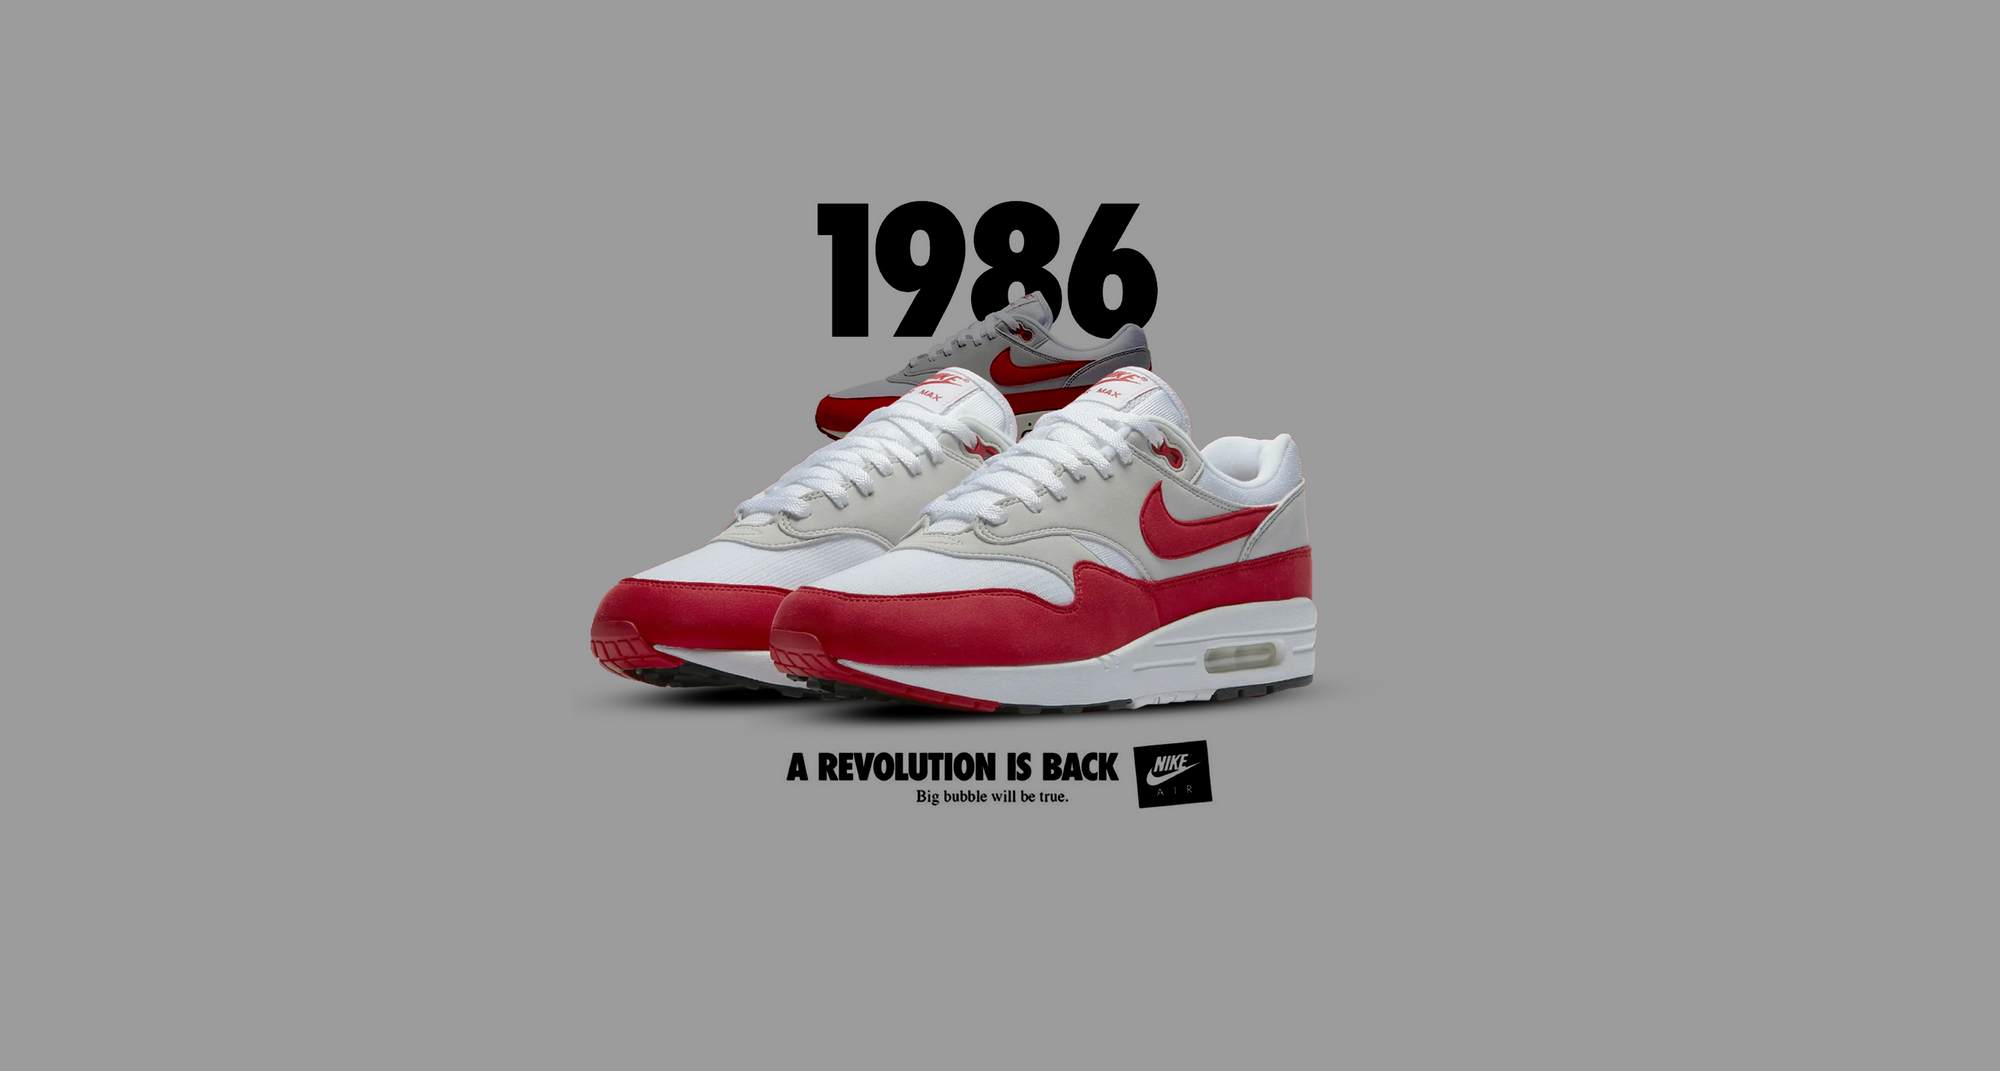 Nike to Bring Back the Air Max 1 ‘Big Bubble’